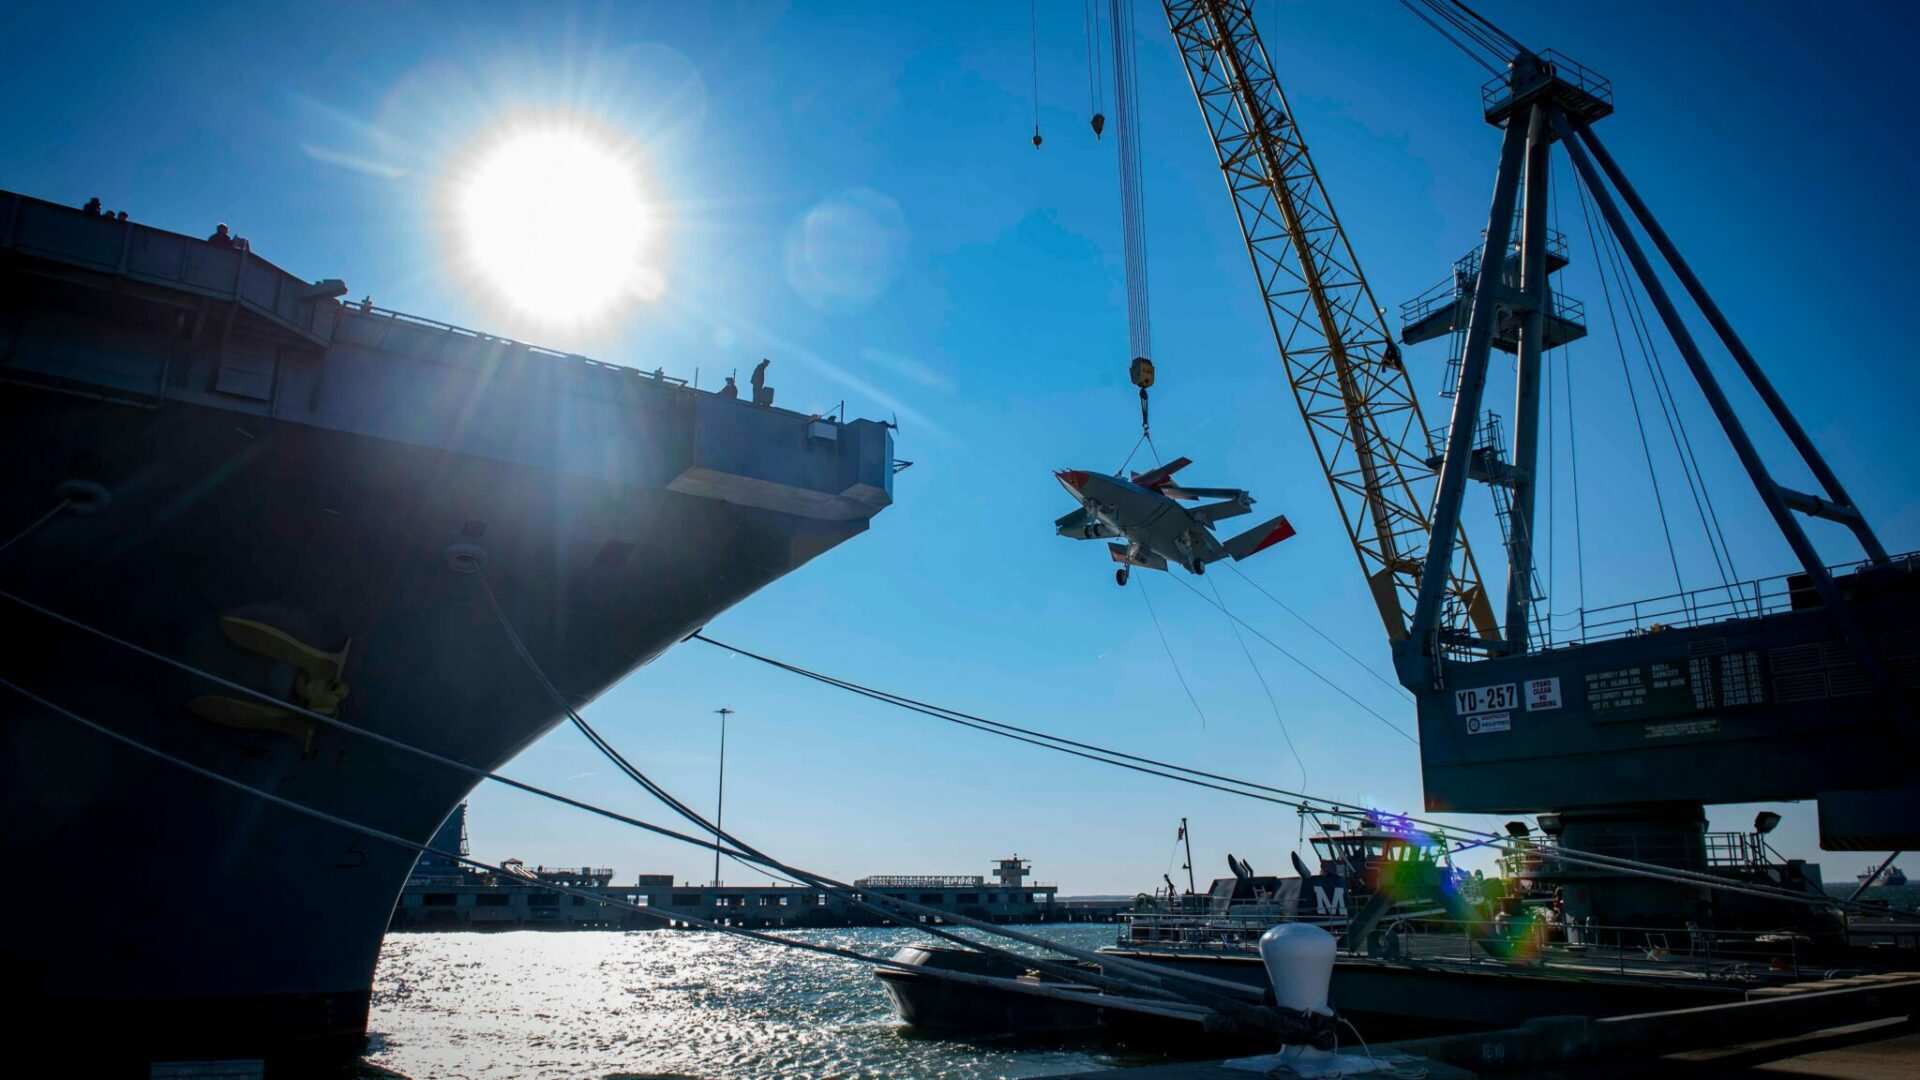 Video: Navy’s new drone, capable of fueling aircraft in flight, undergoes testing on USS George H.W. Bush